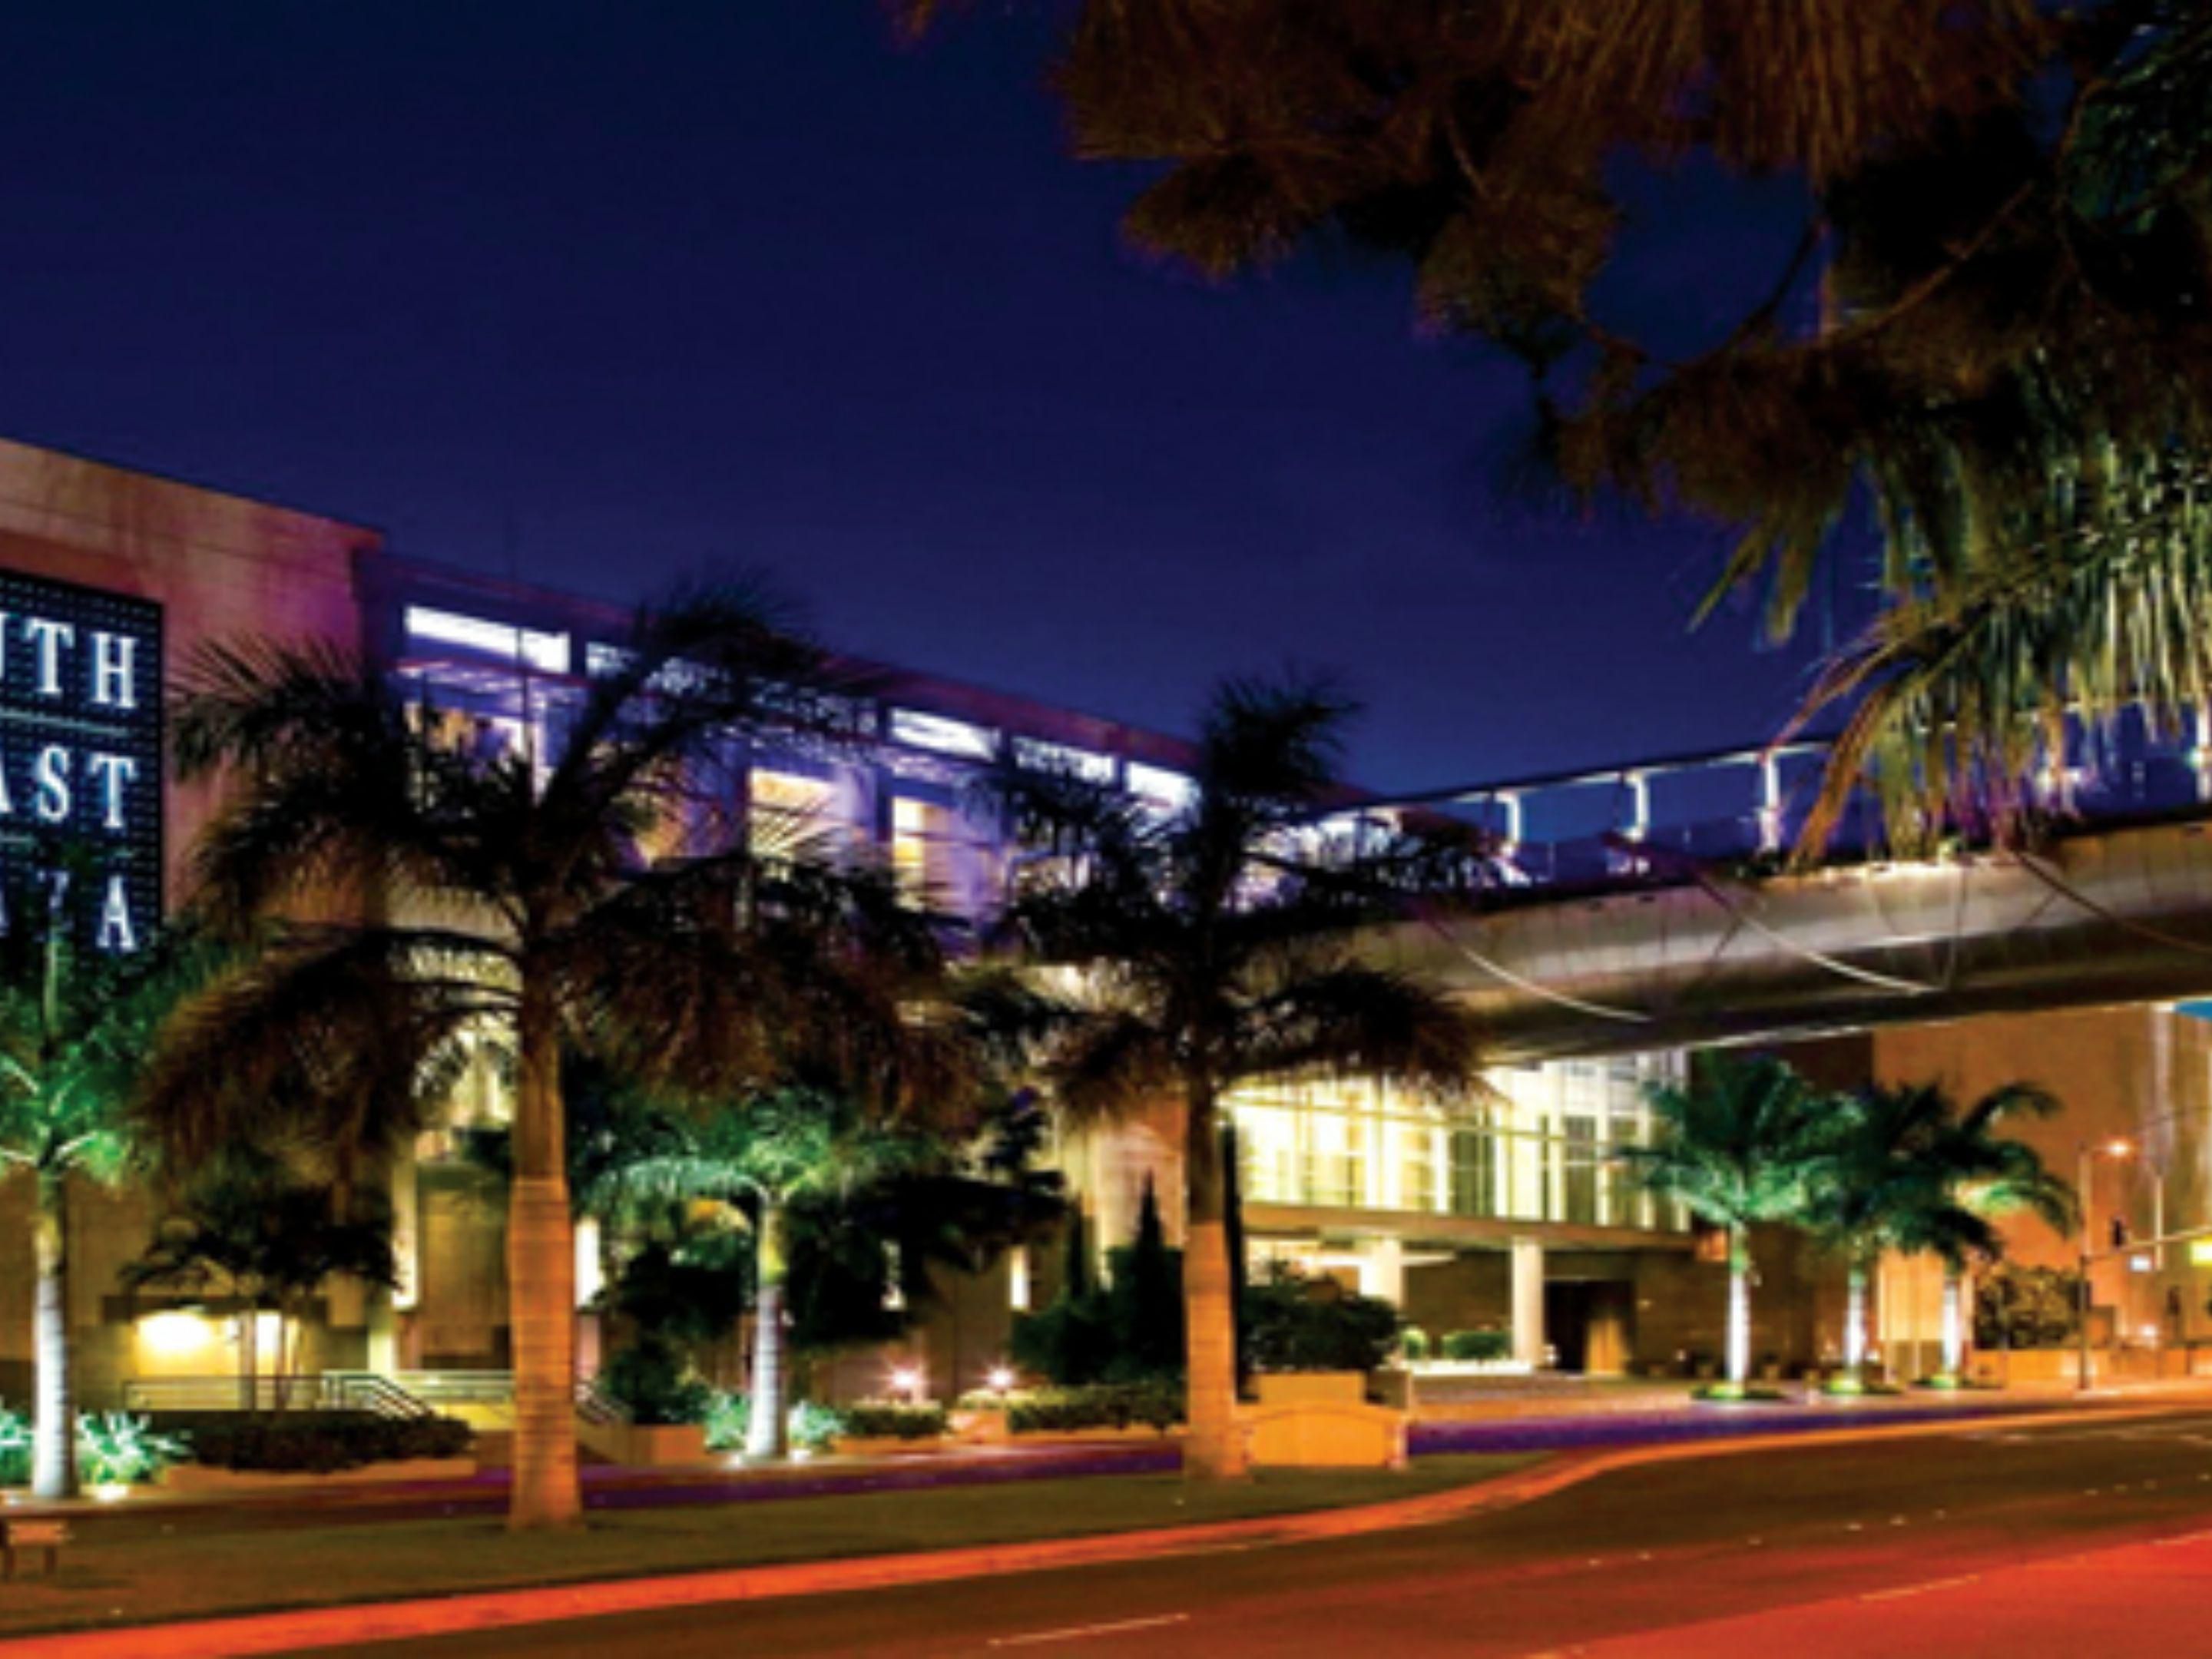 Jumpstart your holiday shopping early  this year at this world renowned shopping mall offering a unique assortment of high end boutiques and extraordinary dining options.  Shop safe and take advantage of curbside pick up offered by many retailers. Holiday Inn OC Airport is just a short drive away!